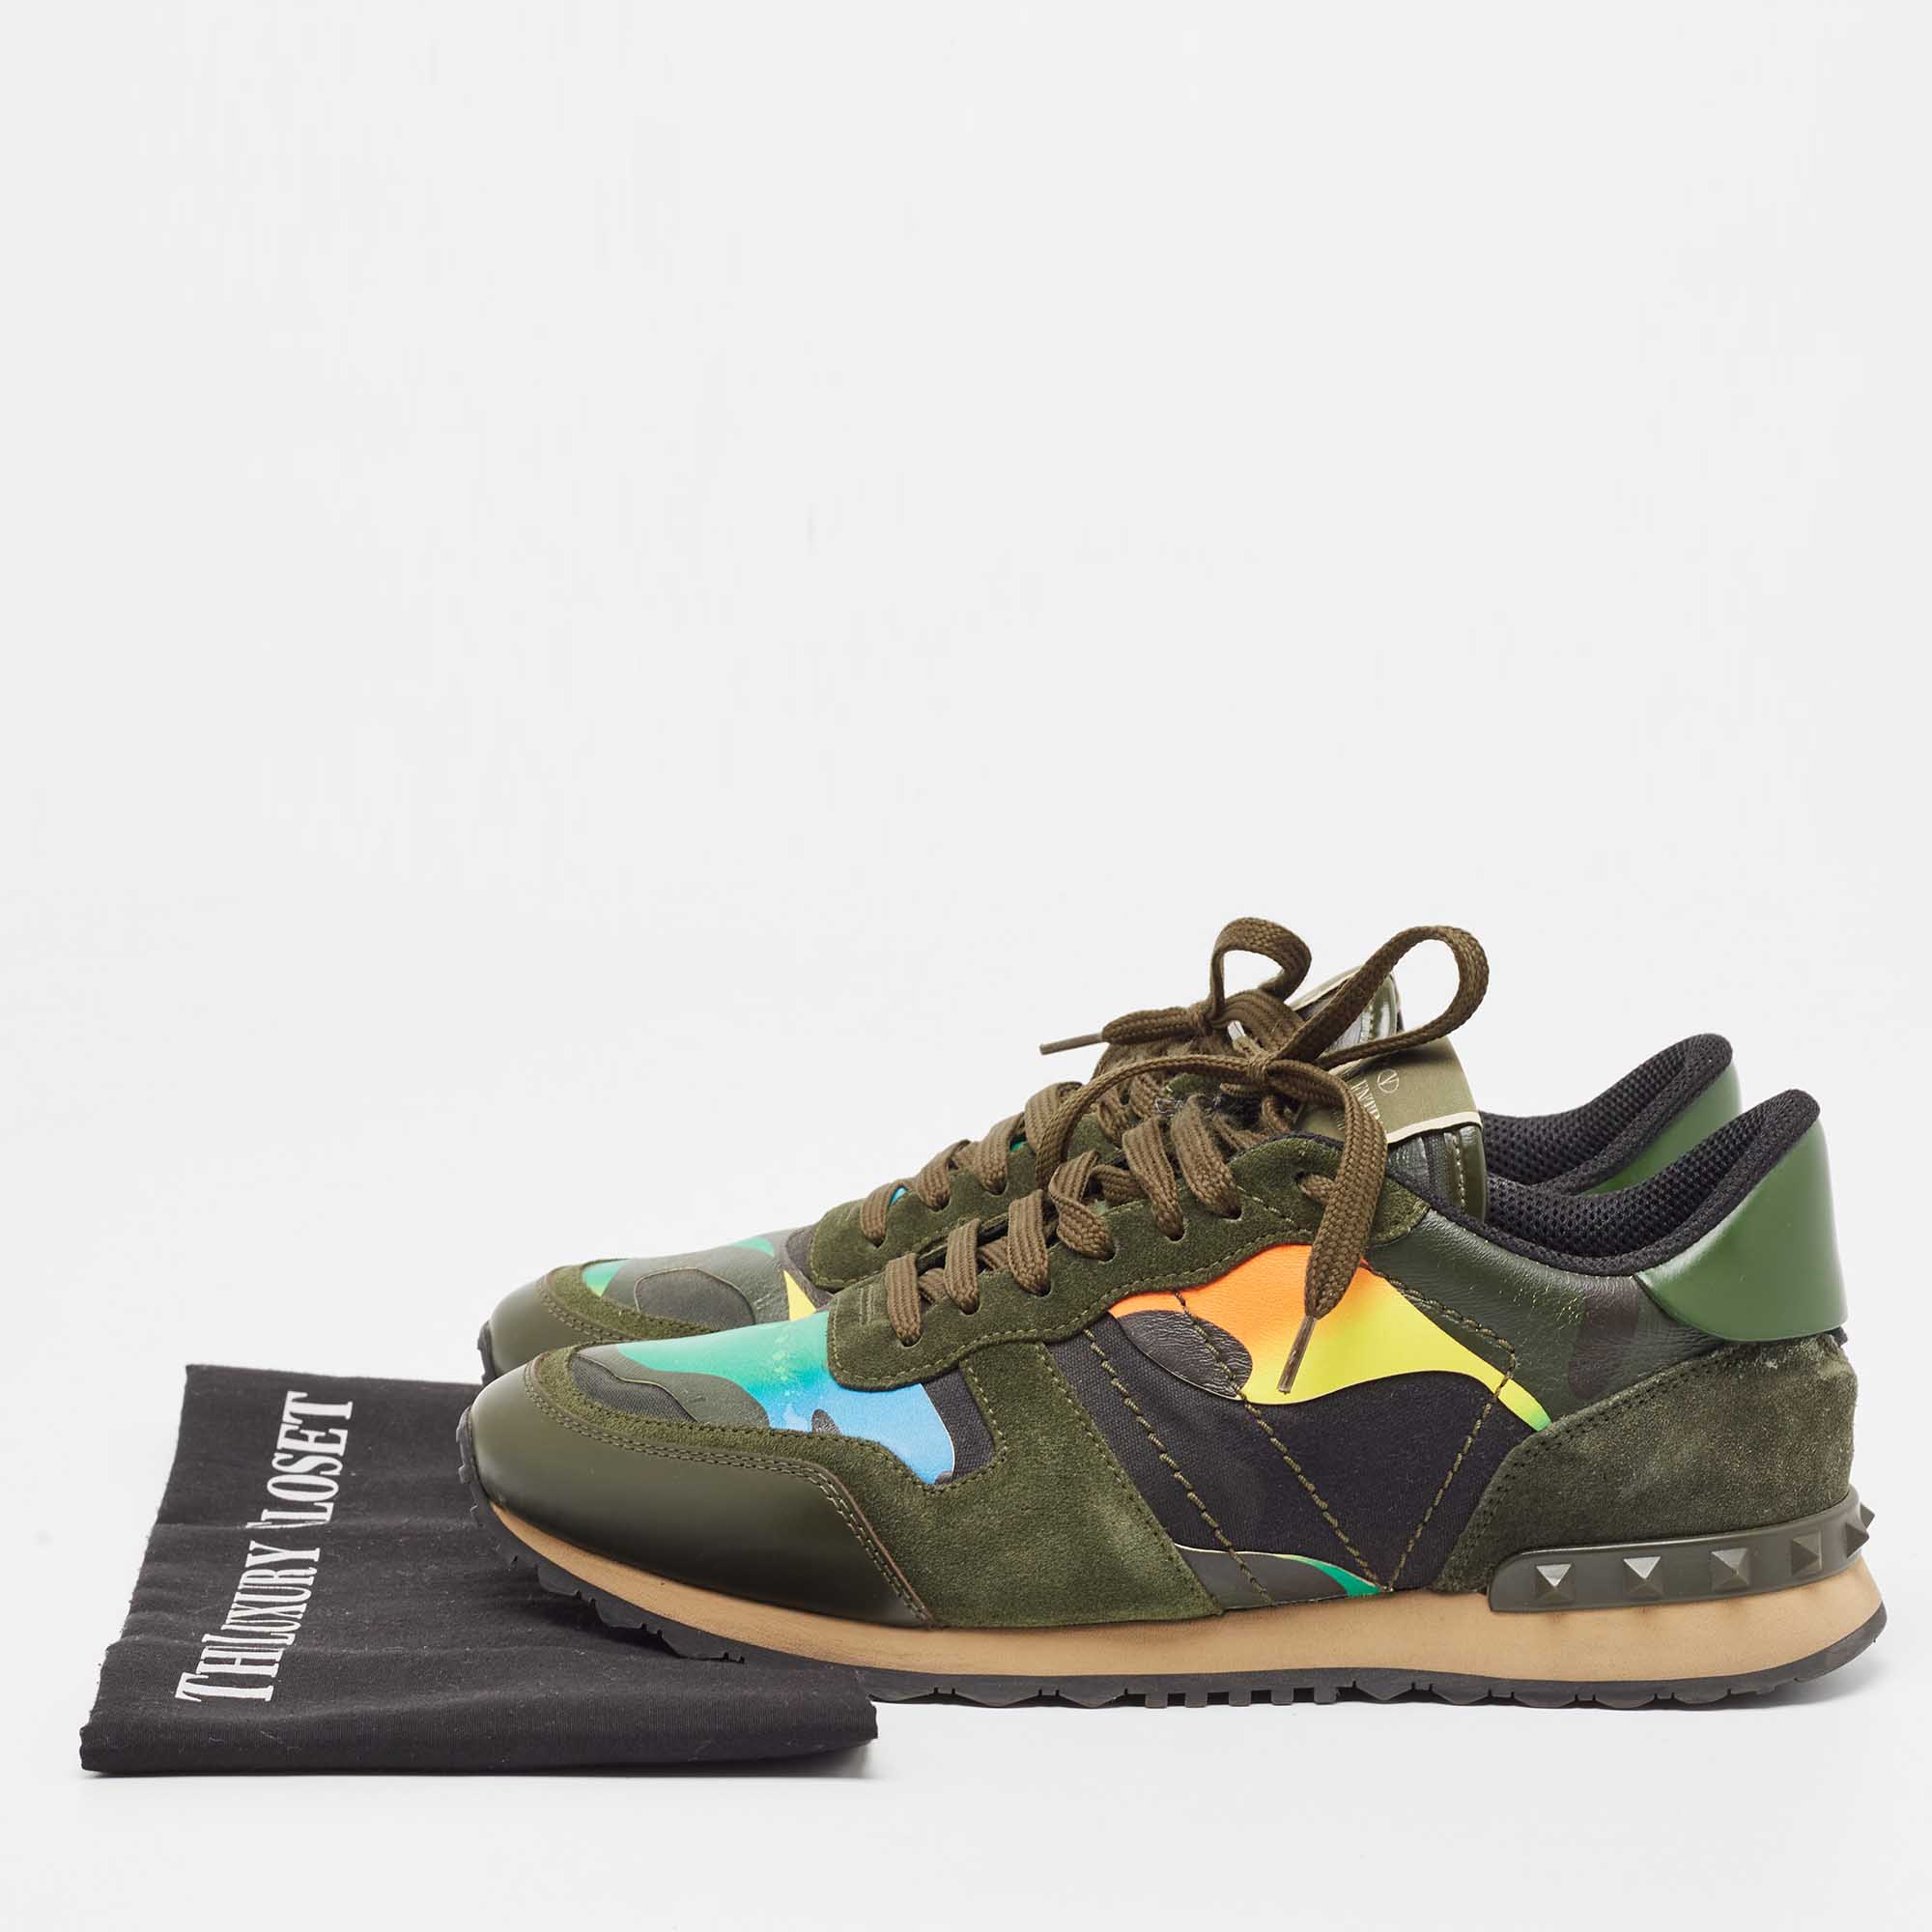 Valentino Multicolor Camo Print Leather And Suede Rockrunner Sneakers Size 41